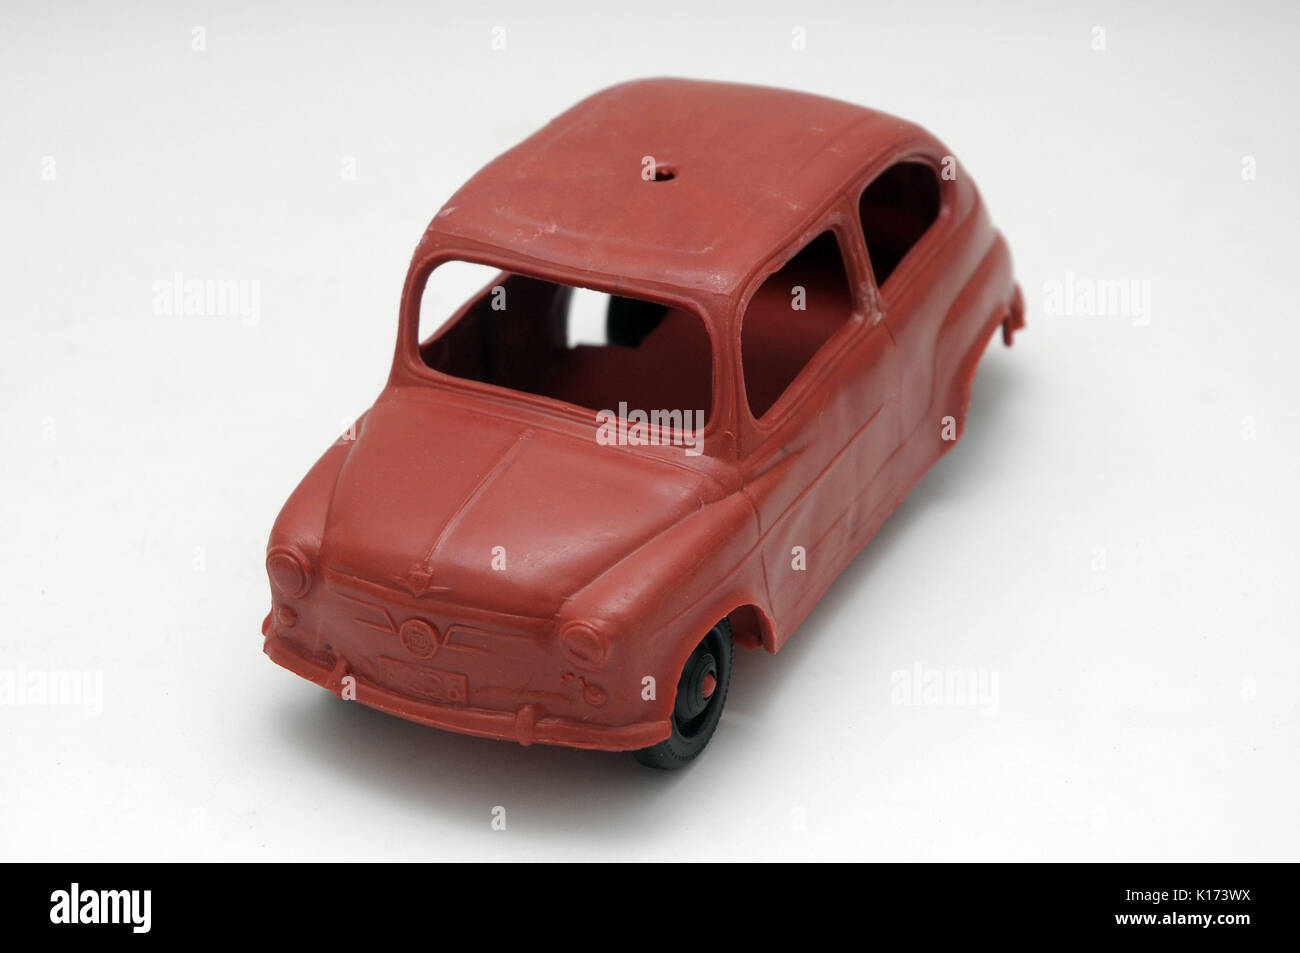 Plastic toy Seat 600 from strret shop for children70s. CAR MADE ON PLASTIC Synthetic material, obtained by carbon polymerization, which can be molded Stock Photo